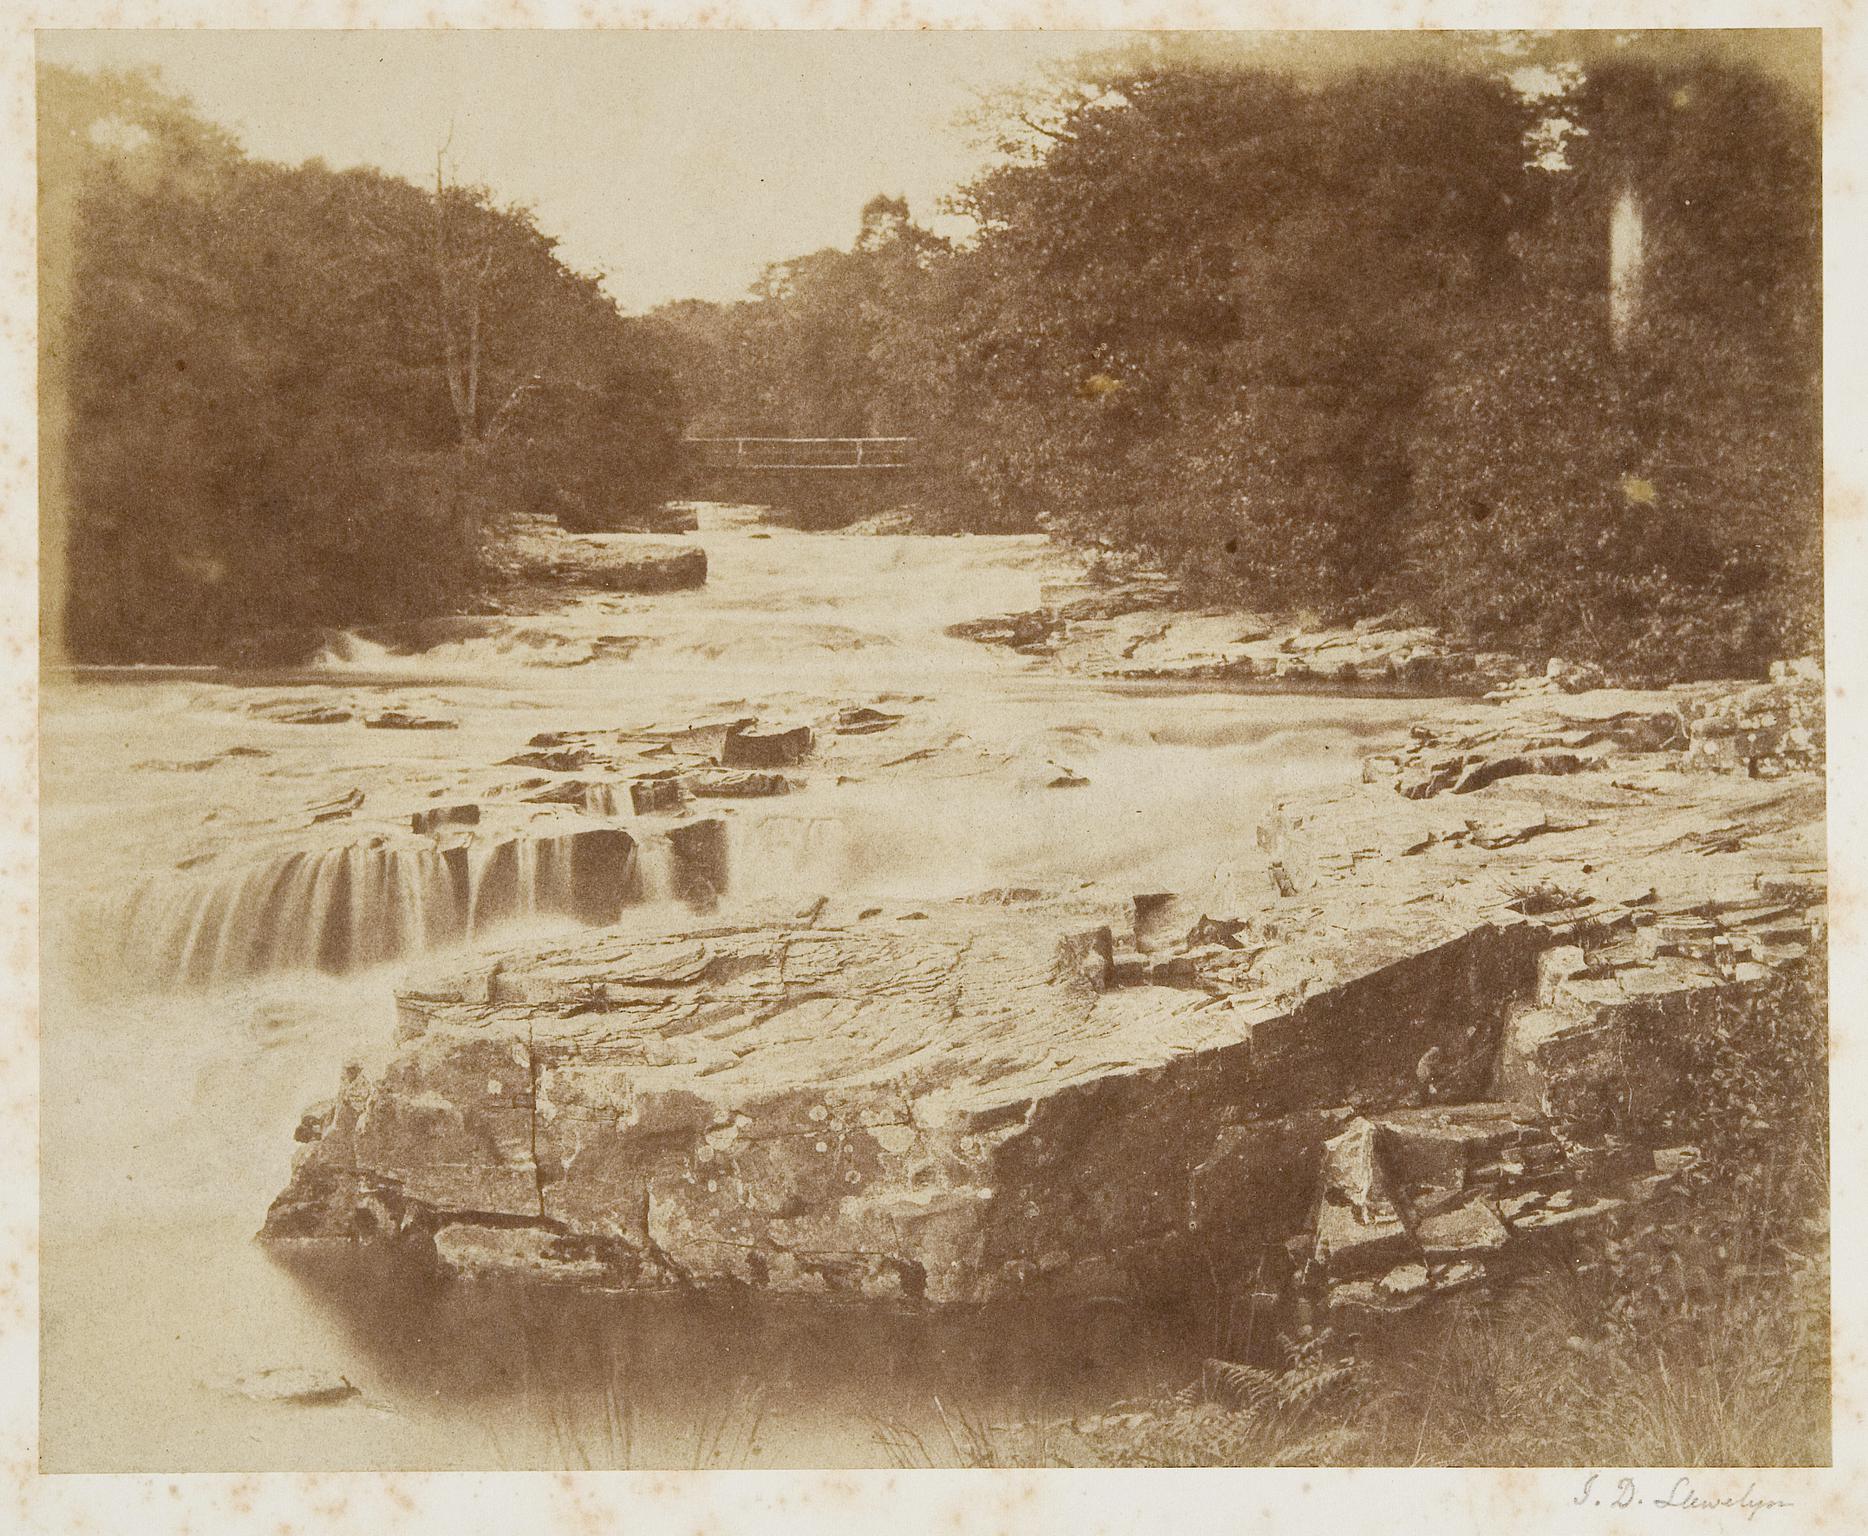 Rapids on the Dulais, Neath Valley, photograph